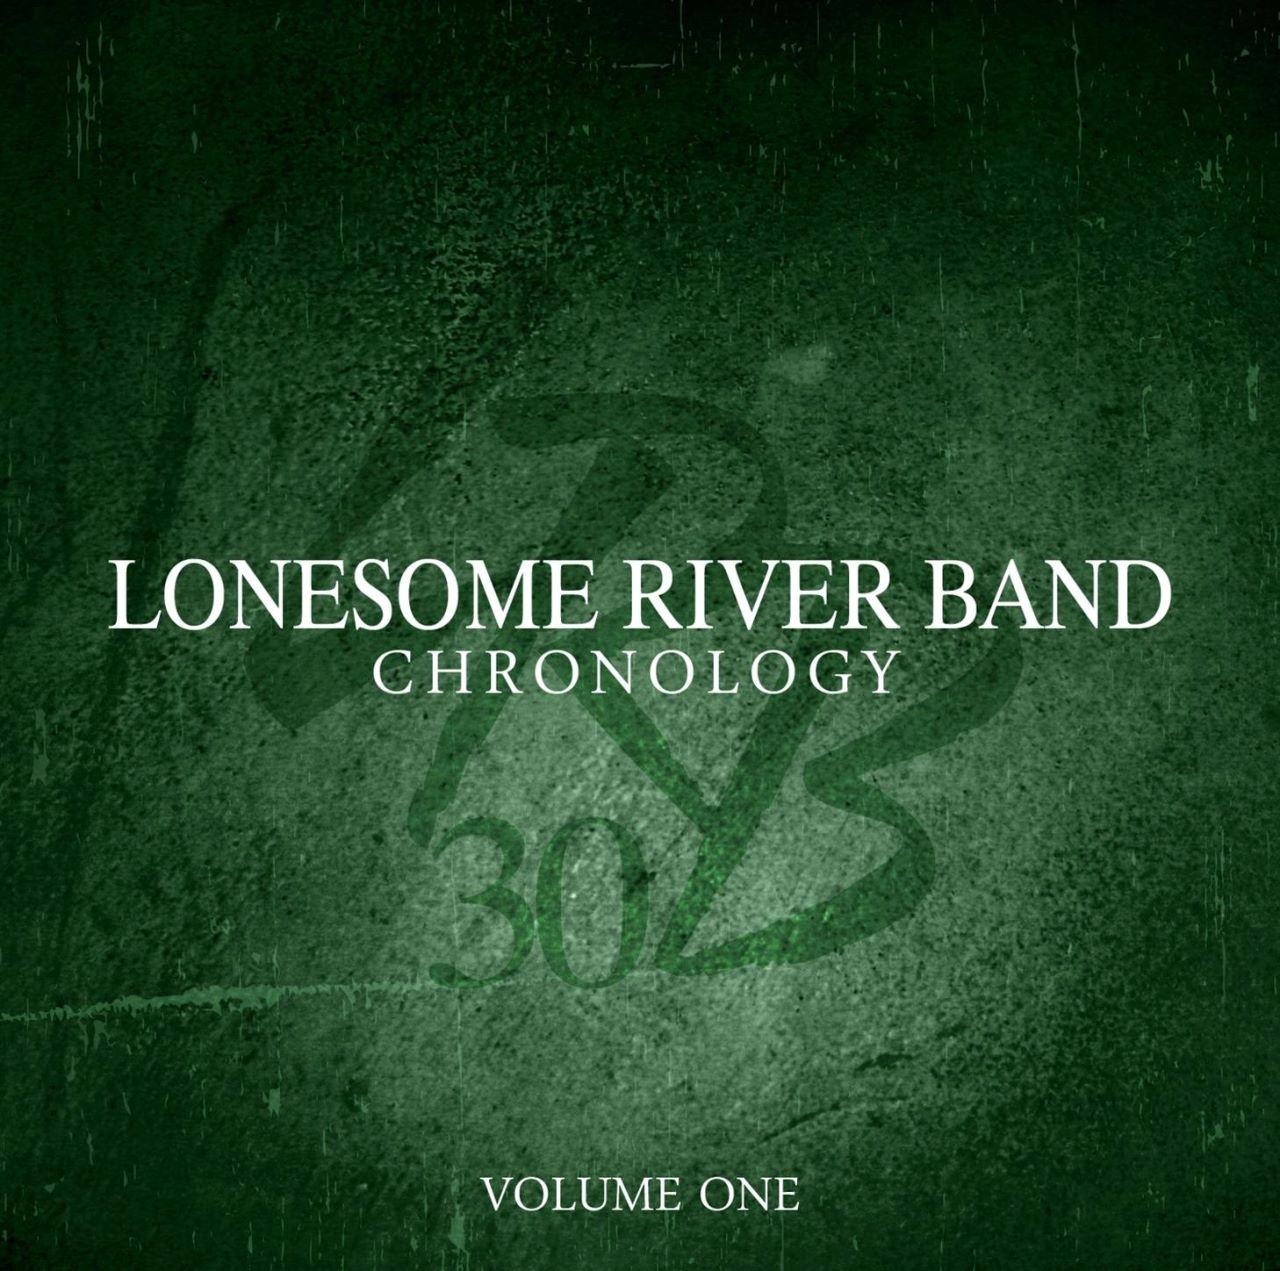 Lonesome River Band - Chronology, Volume One cover album